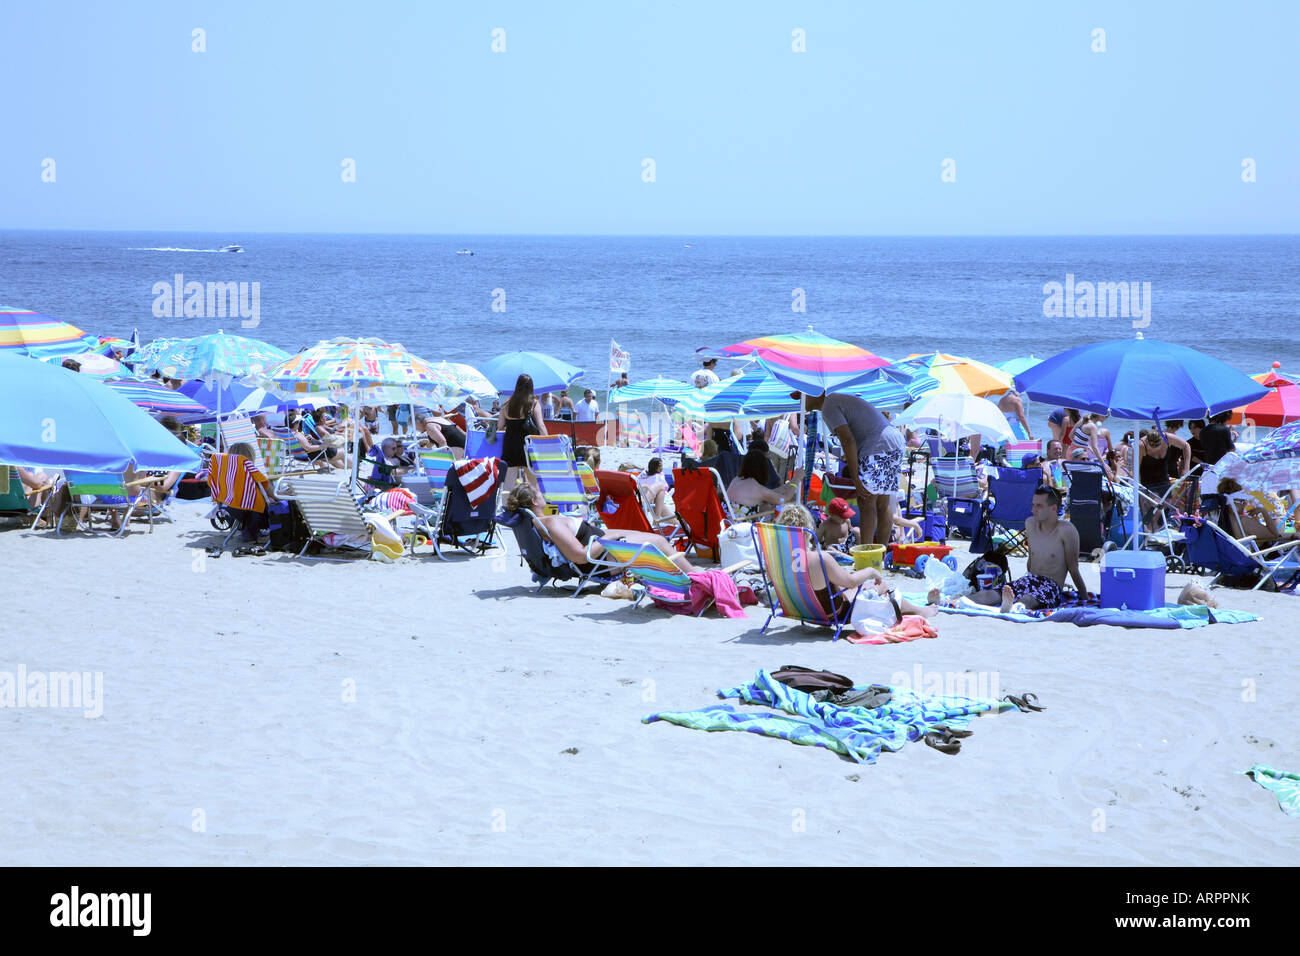 Crowd of people with colorful beach umbrellas, chairs and towels relaxing on sandy beach at New Jersey shore. Stock Photo